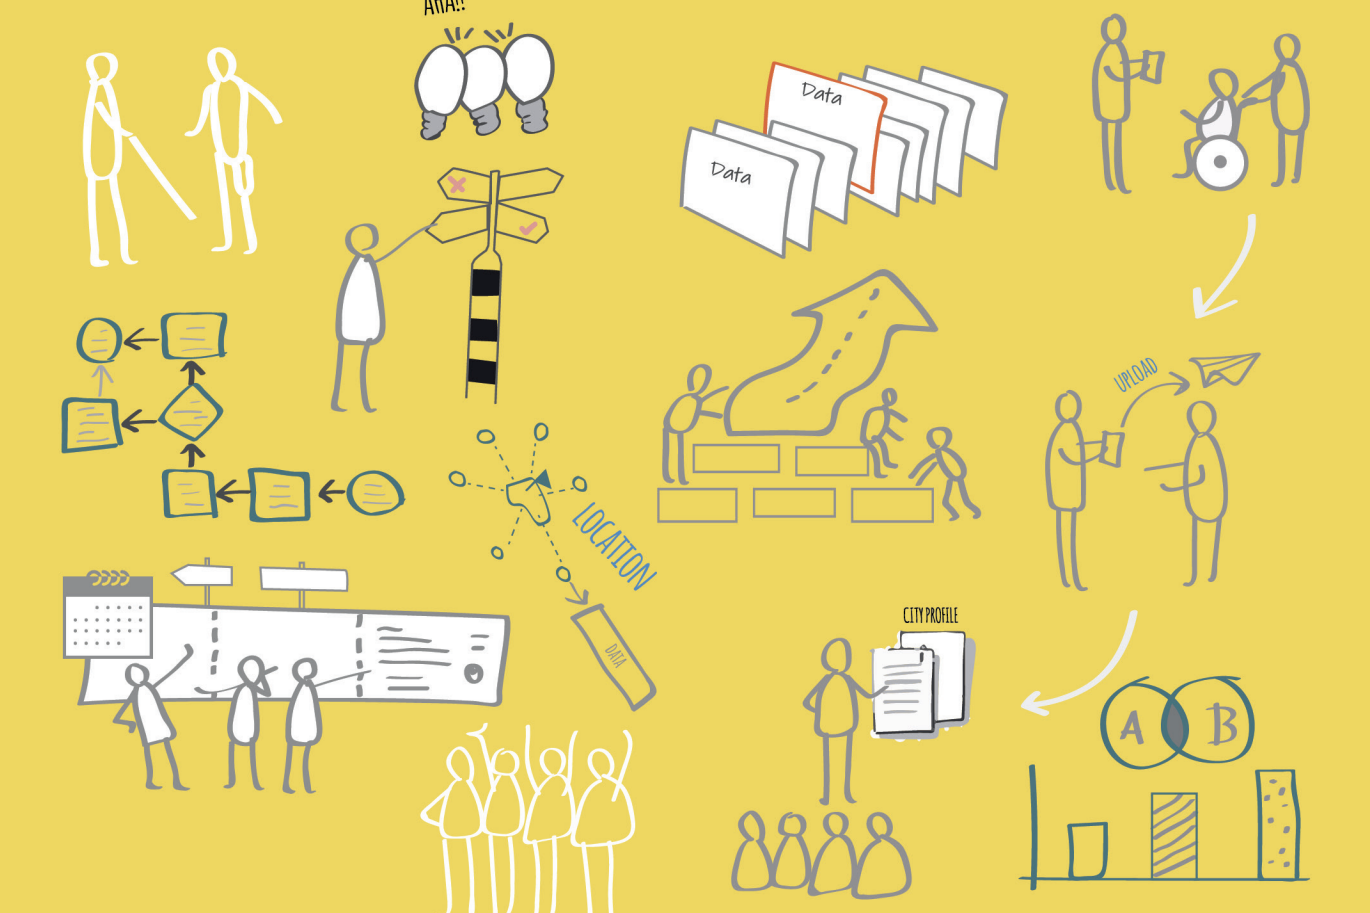 Illustration of people and objects on a yellow backdrop (taken from from Kota Kita's report)